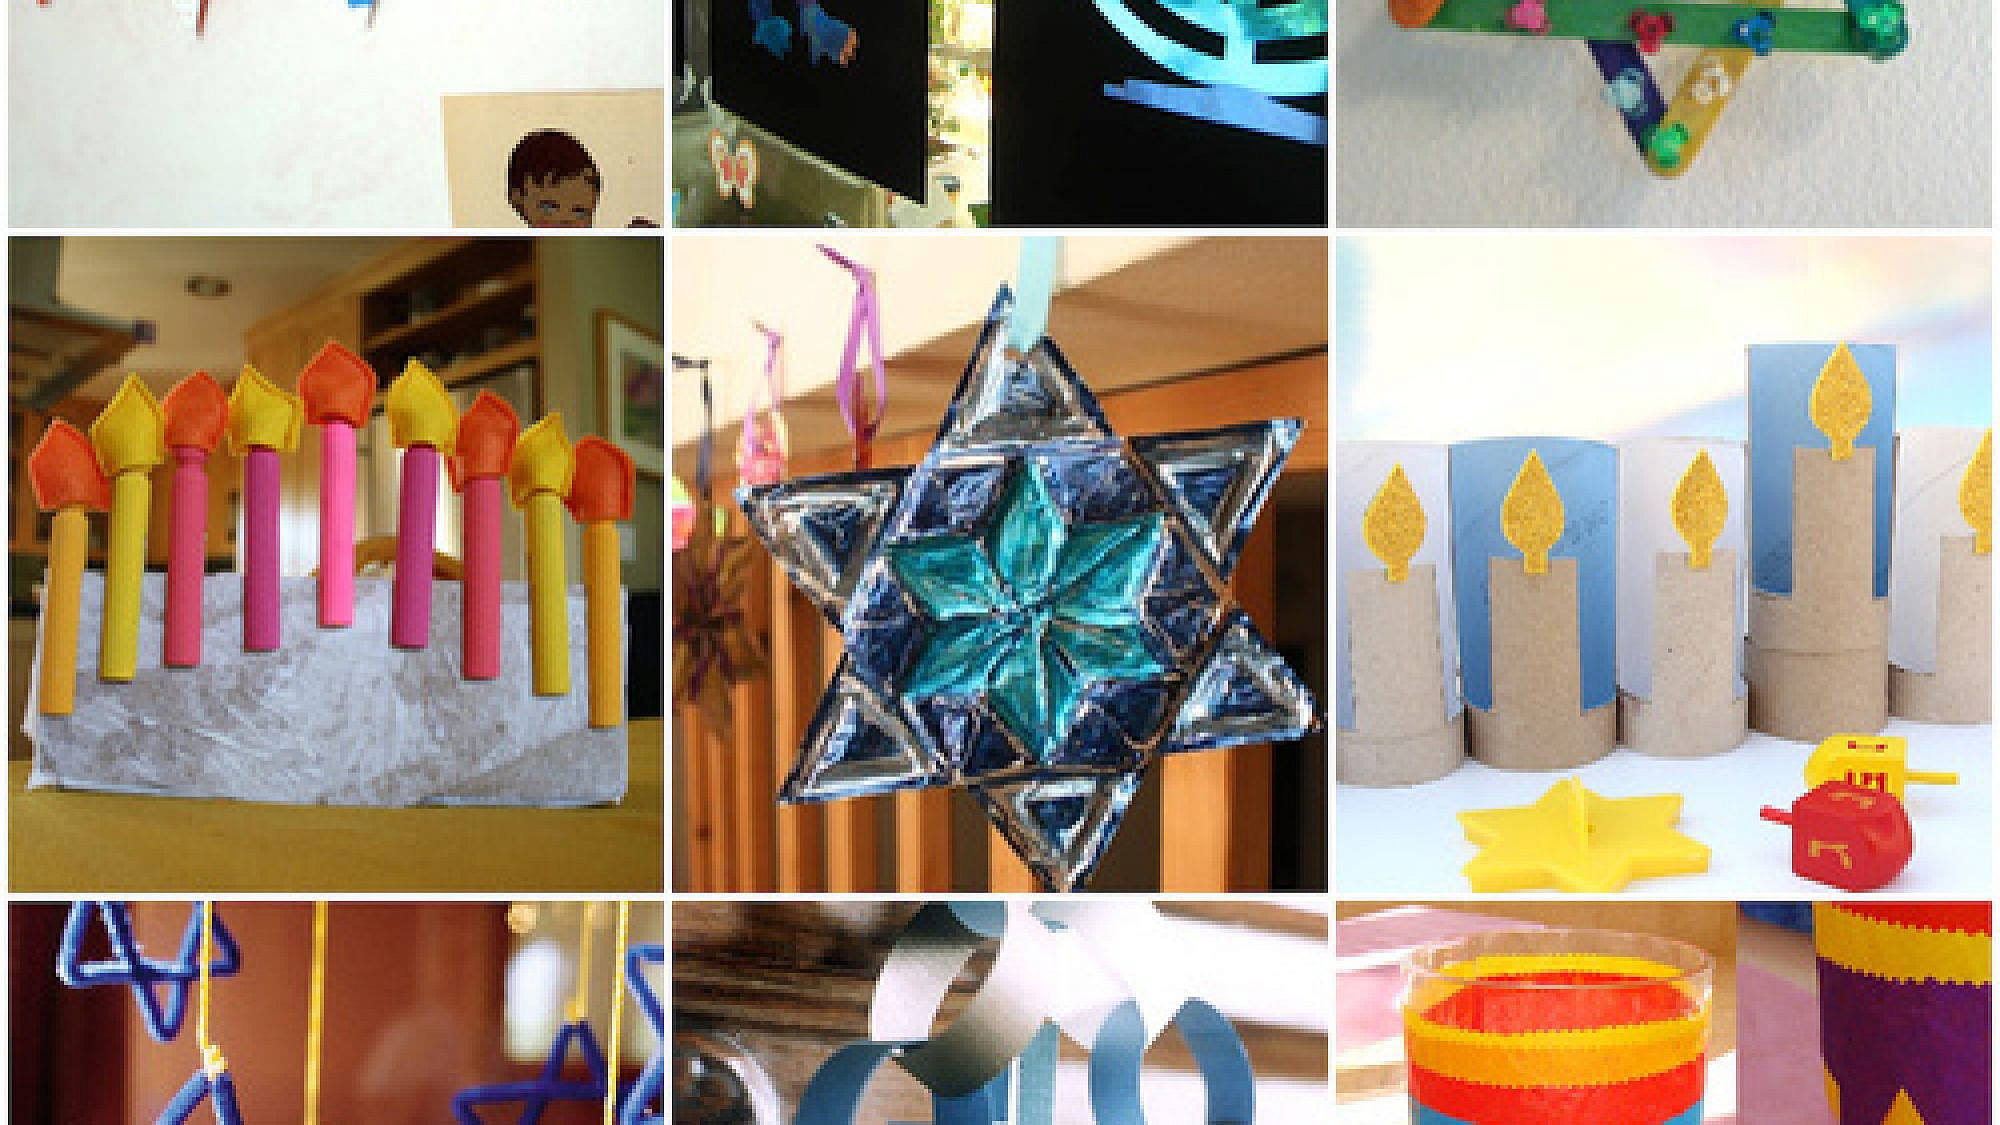 8 ways to celebrate Hanukkah that don’t involve gifts | JNS.org